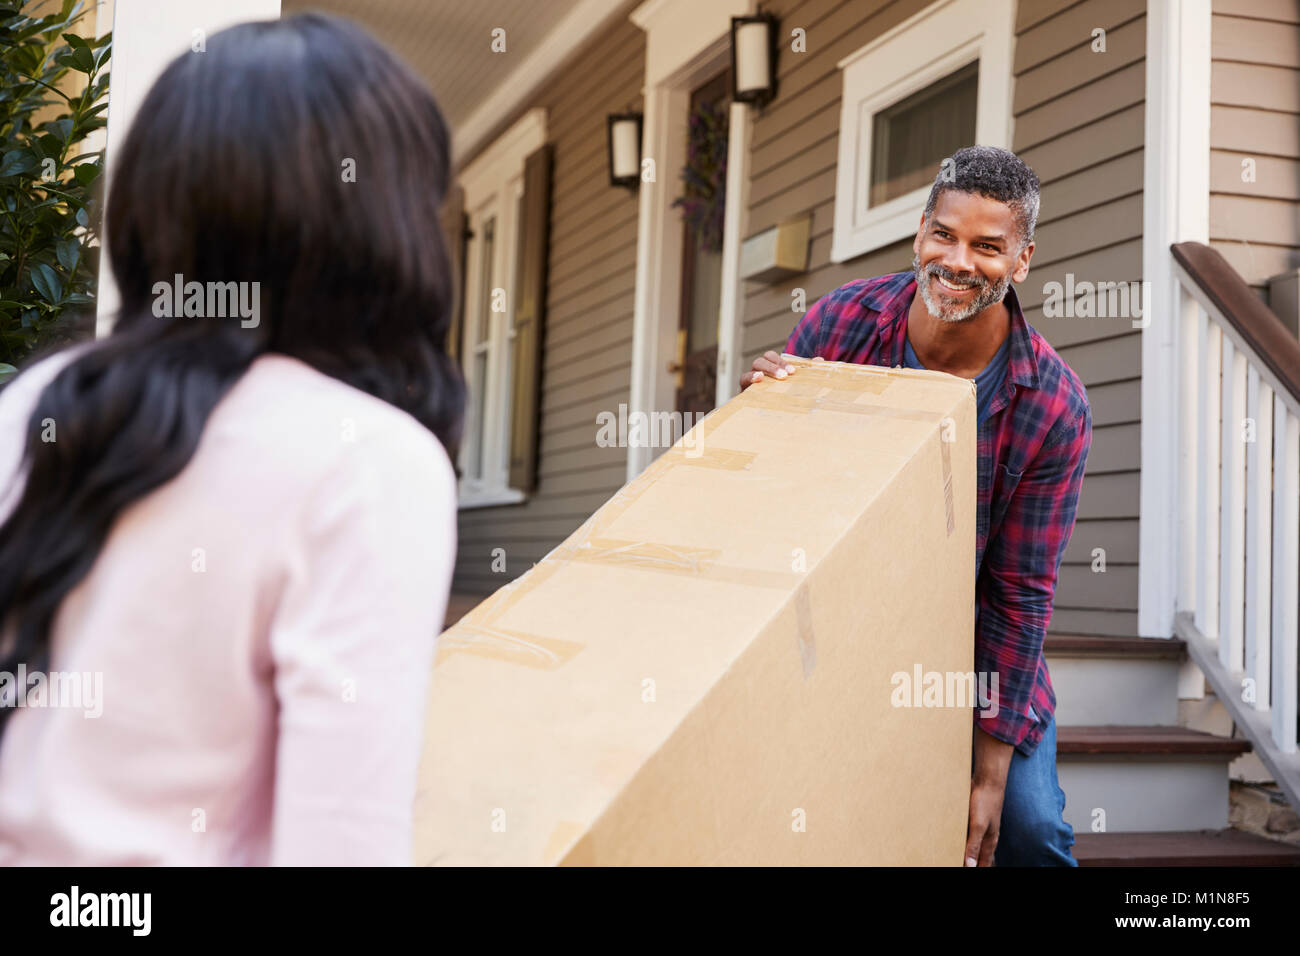 Couple Carrying Big Box Purchase Into House Stock Photo